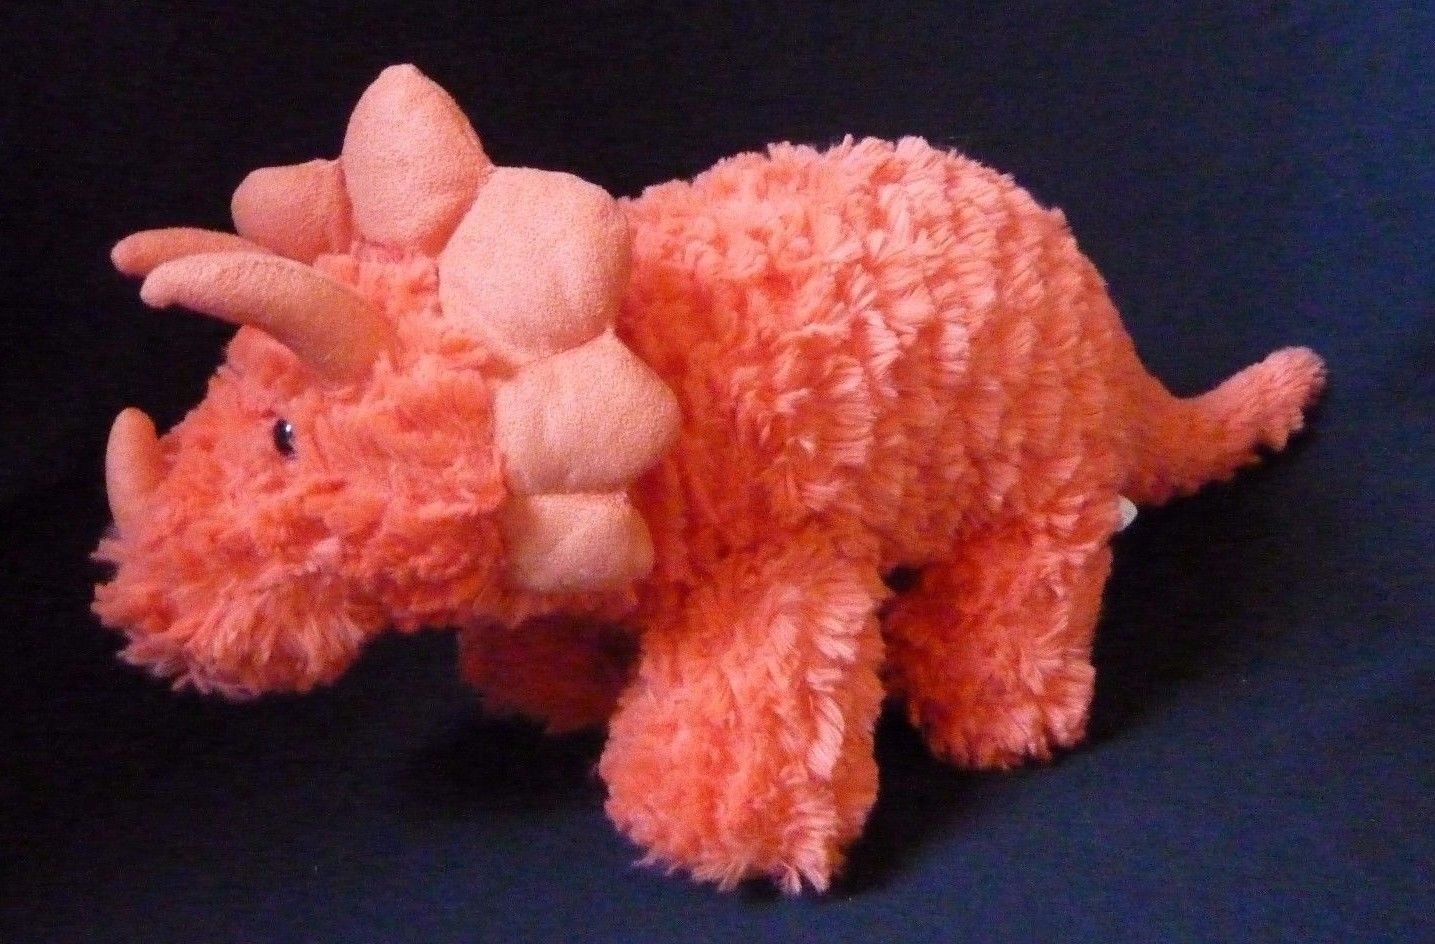 pink triceratops toy